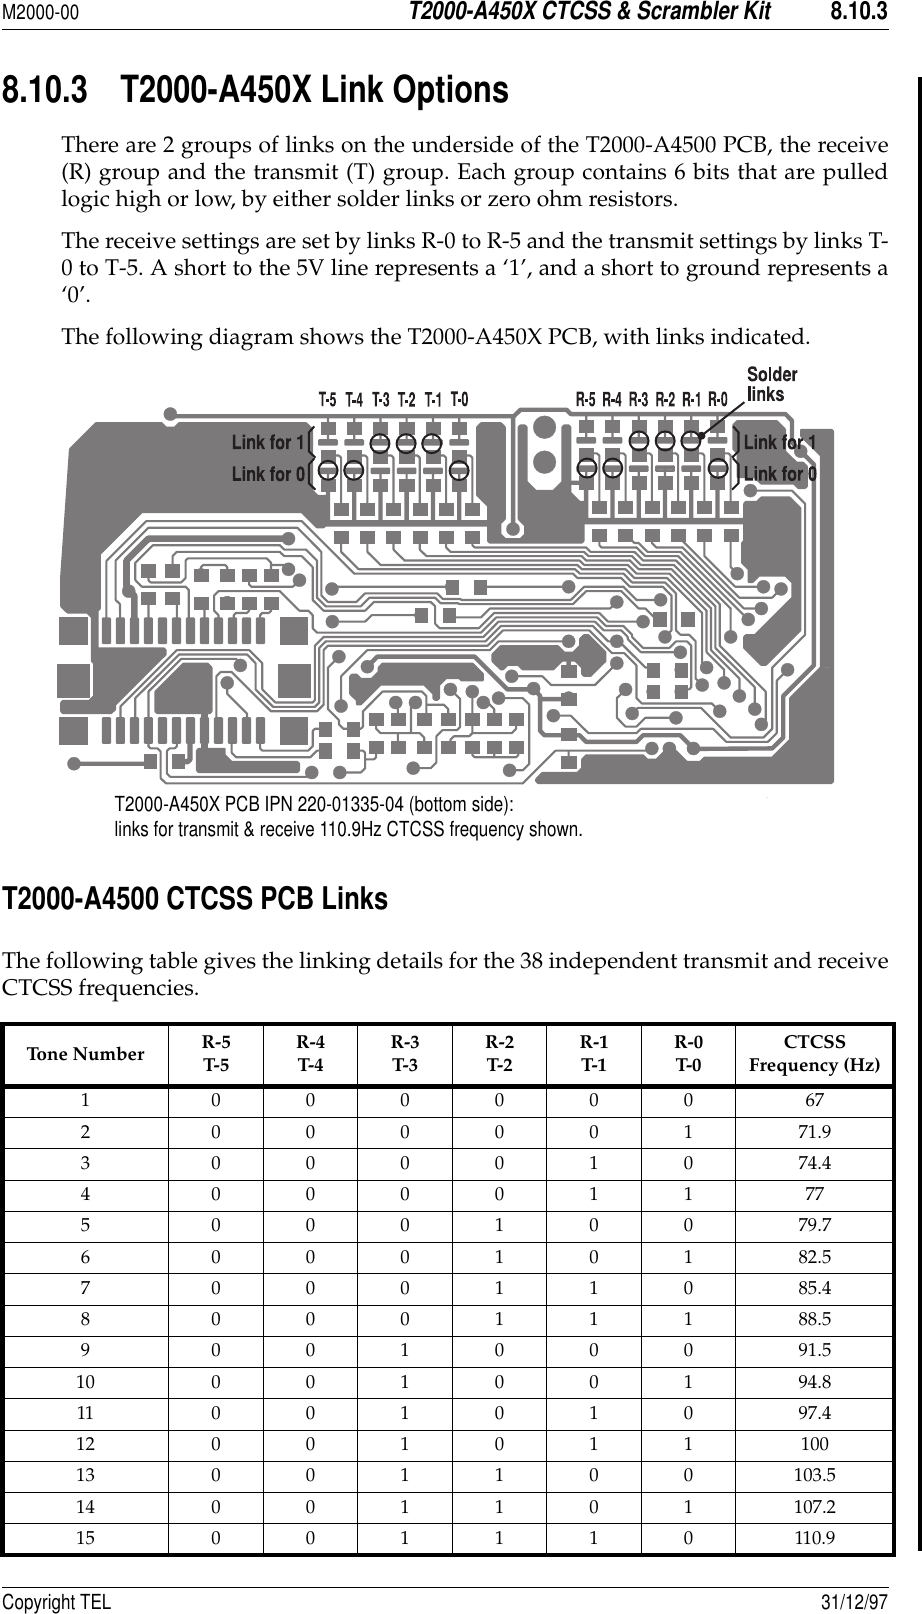 M2000-00T2000-A450X CTCSS &amp; Scrambler Kit8.10.3Copyright TEL 31/12/978.10.3 T2000-A450X Link Options There are 2 groups of links on the underside of the T2000-A4500 PCB, the receive(R) group and the transmit (T) group. Each group contains 6 bits that are pulledlogic high or low, by either solder links or zero ohm resistors.The receive settings are set by links R-0 to R-5 and the transmit settings by links T-0 to T-5. A short to the 5V line represents a ‘1’, and a short to ground represents a‘0’.The following diagram shows the T2000-A450X PCB, with links indicated. T2000-A4500 CTCSS PCB Links The following table gives the linking details for the 38 independent transmit and receiveCTCSS frequencies. Ton e Nu m ber R-5T-5R-4T-4R-3T-3R-2T-2R-1T-1R-0T-0CTCSSFrequency (Hz)1 000000 672 000001 71.93 000010 74.44 000011 775 000100 79.76 000101 82.57 000110 85.48 000111 88.59 001000 91.510 001001 94.811 001010 97.412 001011 10013 001100 103.514 001101 107.215 001110 110.9T2000-A450X PCB IPN 220-01335-04 (bottom side):links for transmit &amp; receive 110.9Hz CTCSS frequency shown.